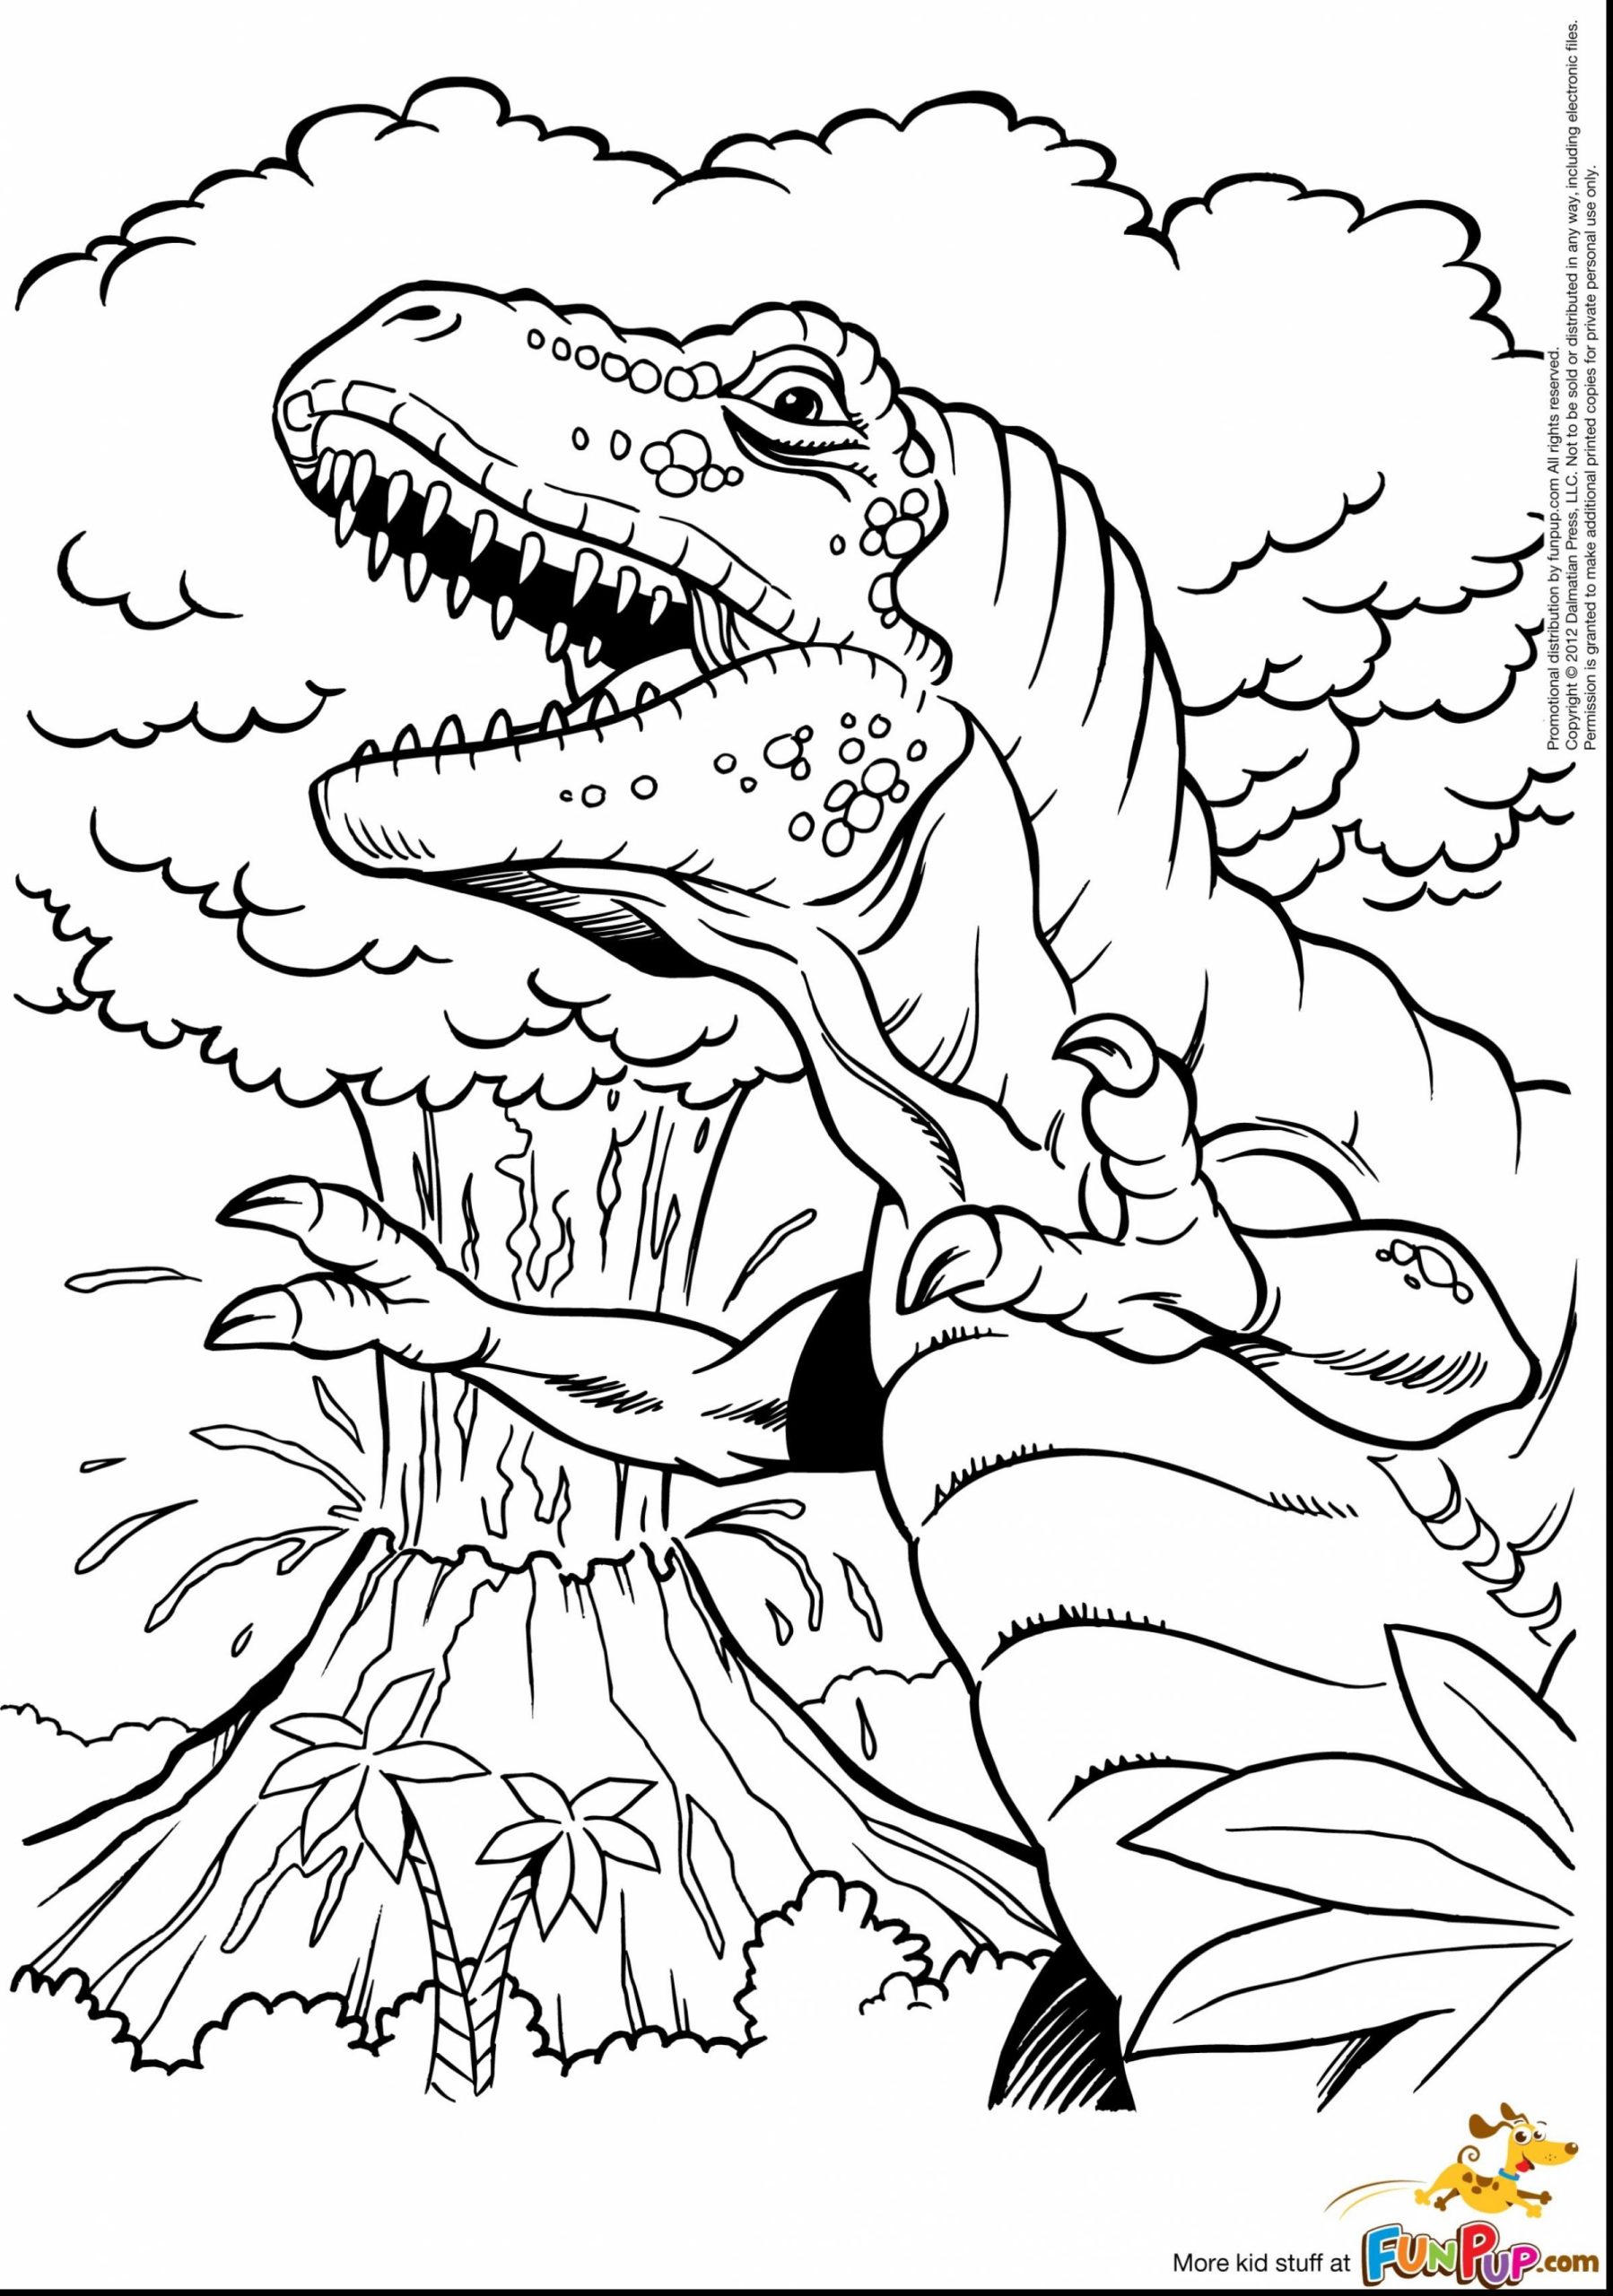 80 Printable T Rex Dinosaur Coloring Pages 23